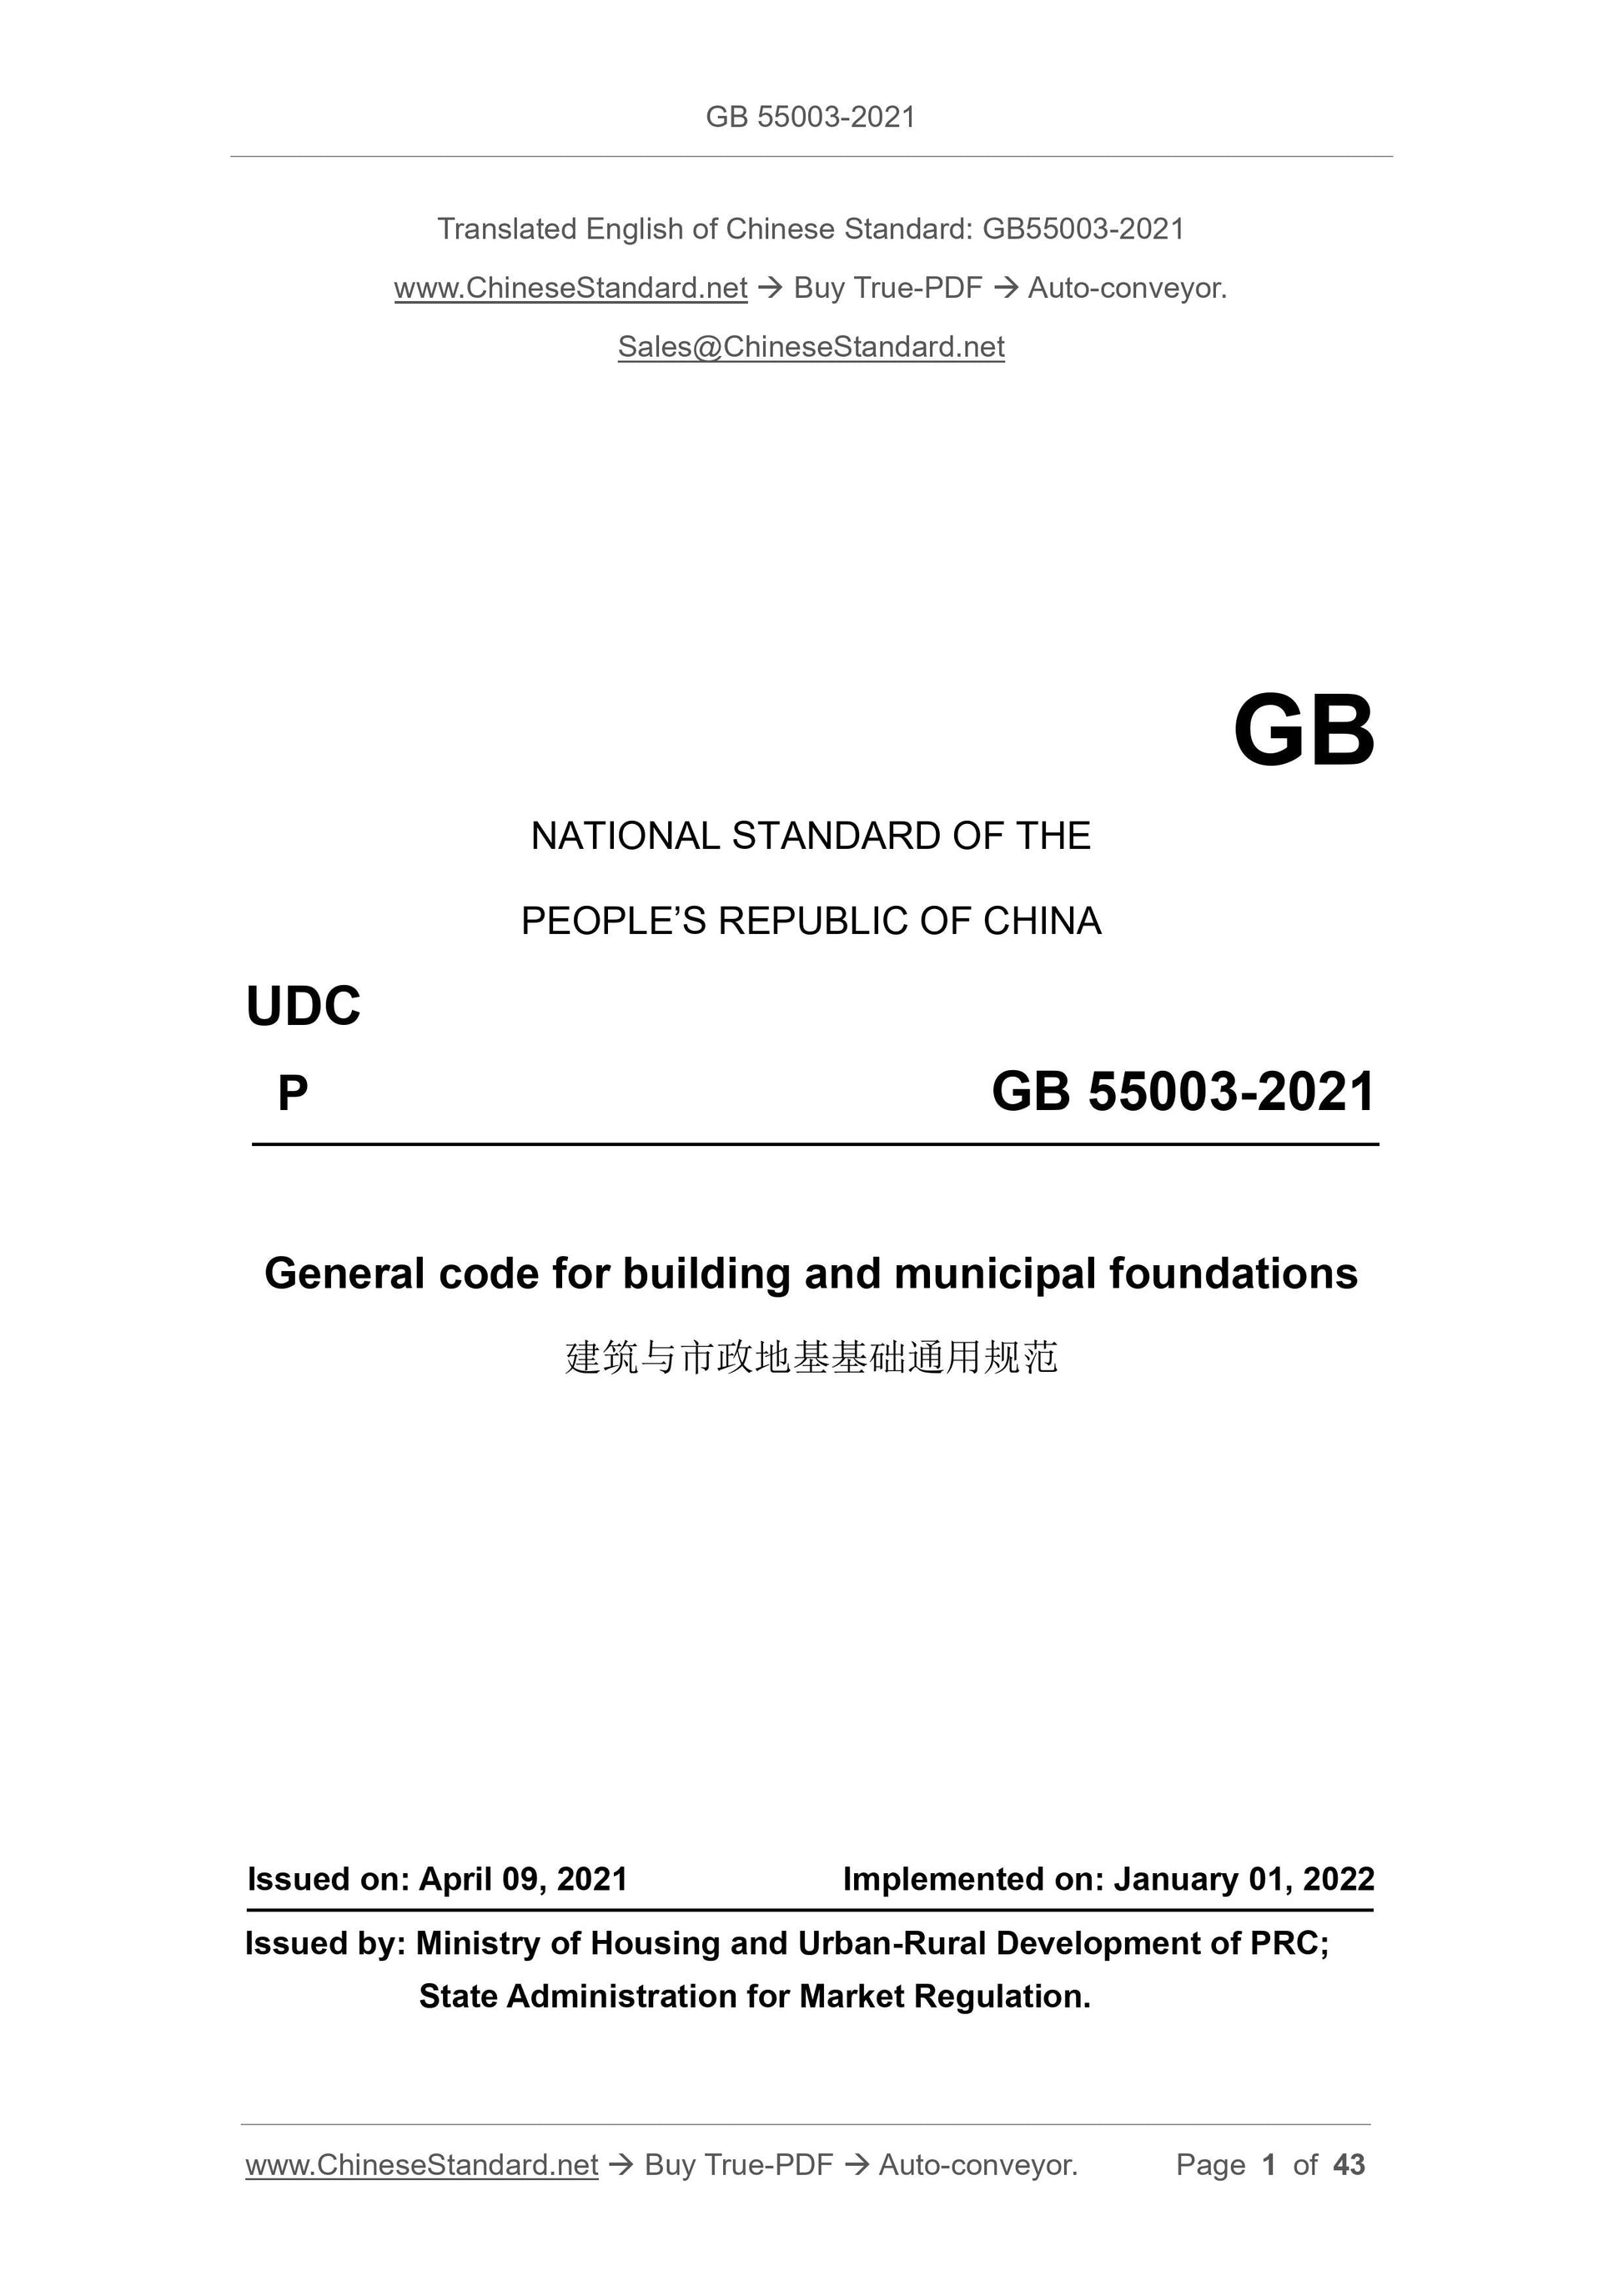 GB 55003-2021 Page 1